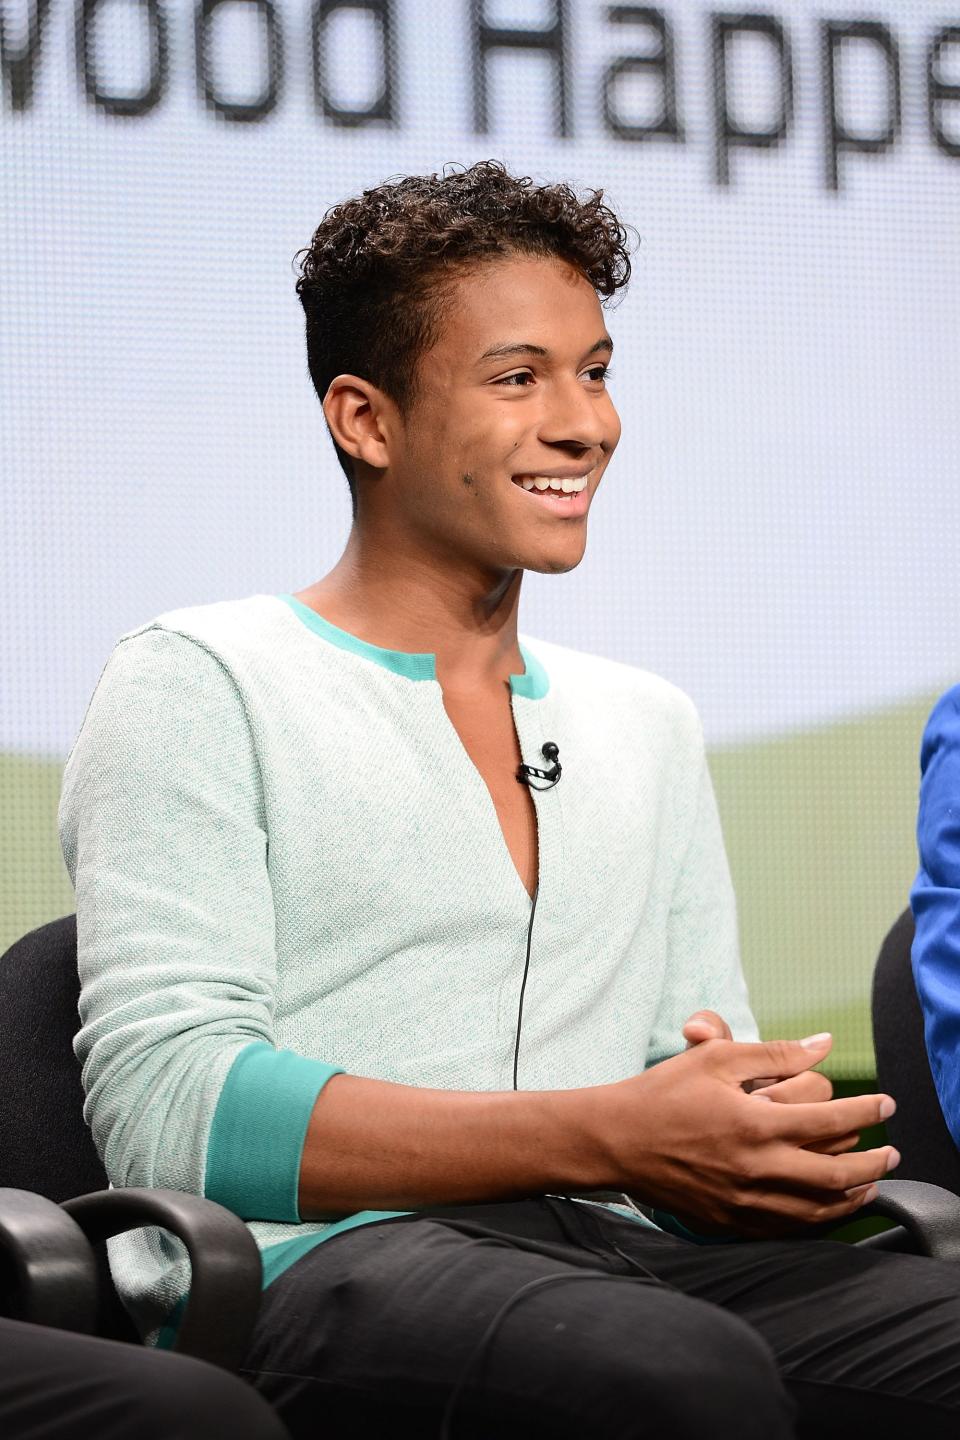 Jaafar Jackson speaks on stage at the Reelz Channel 'Living With The Jacksons' panel at the 2014 Summer Television Critics Association at The Beverly Hilton Hotel on July 12, 2014 in Beverly Hills, California.